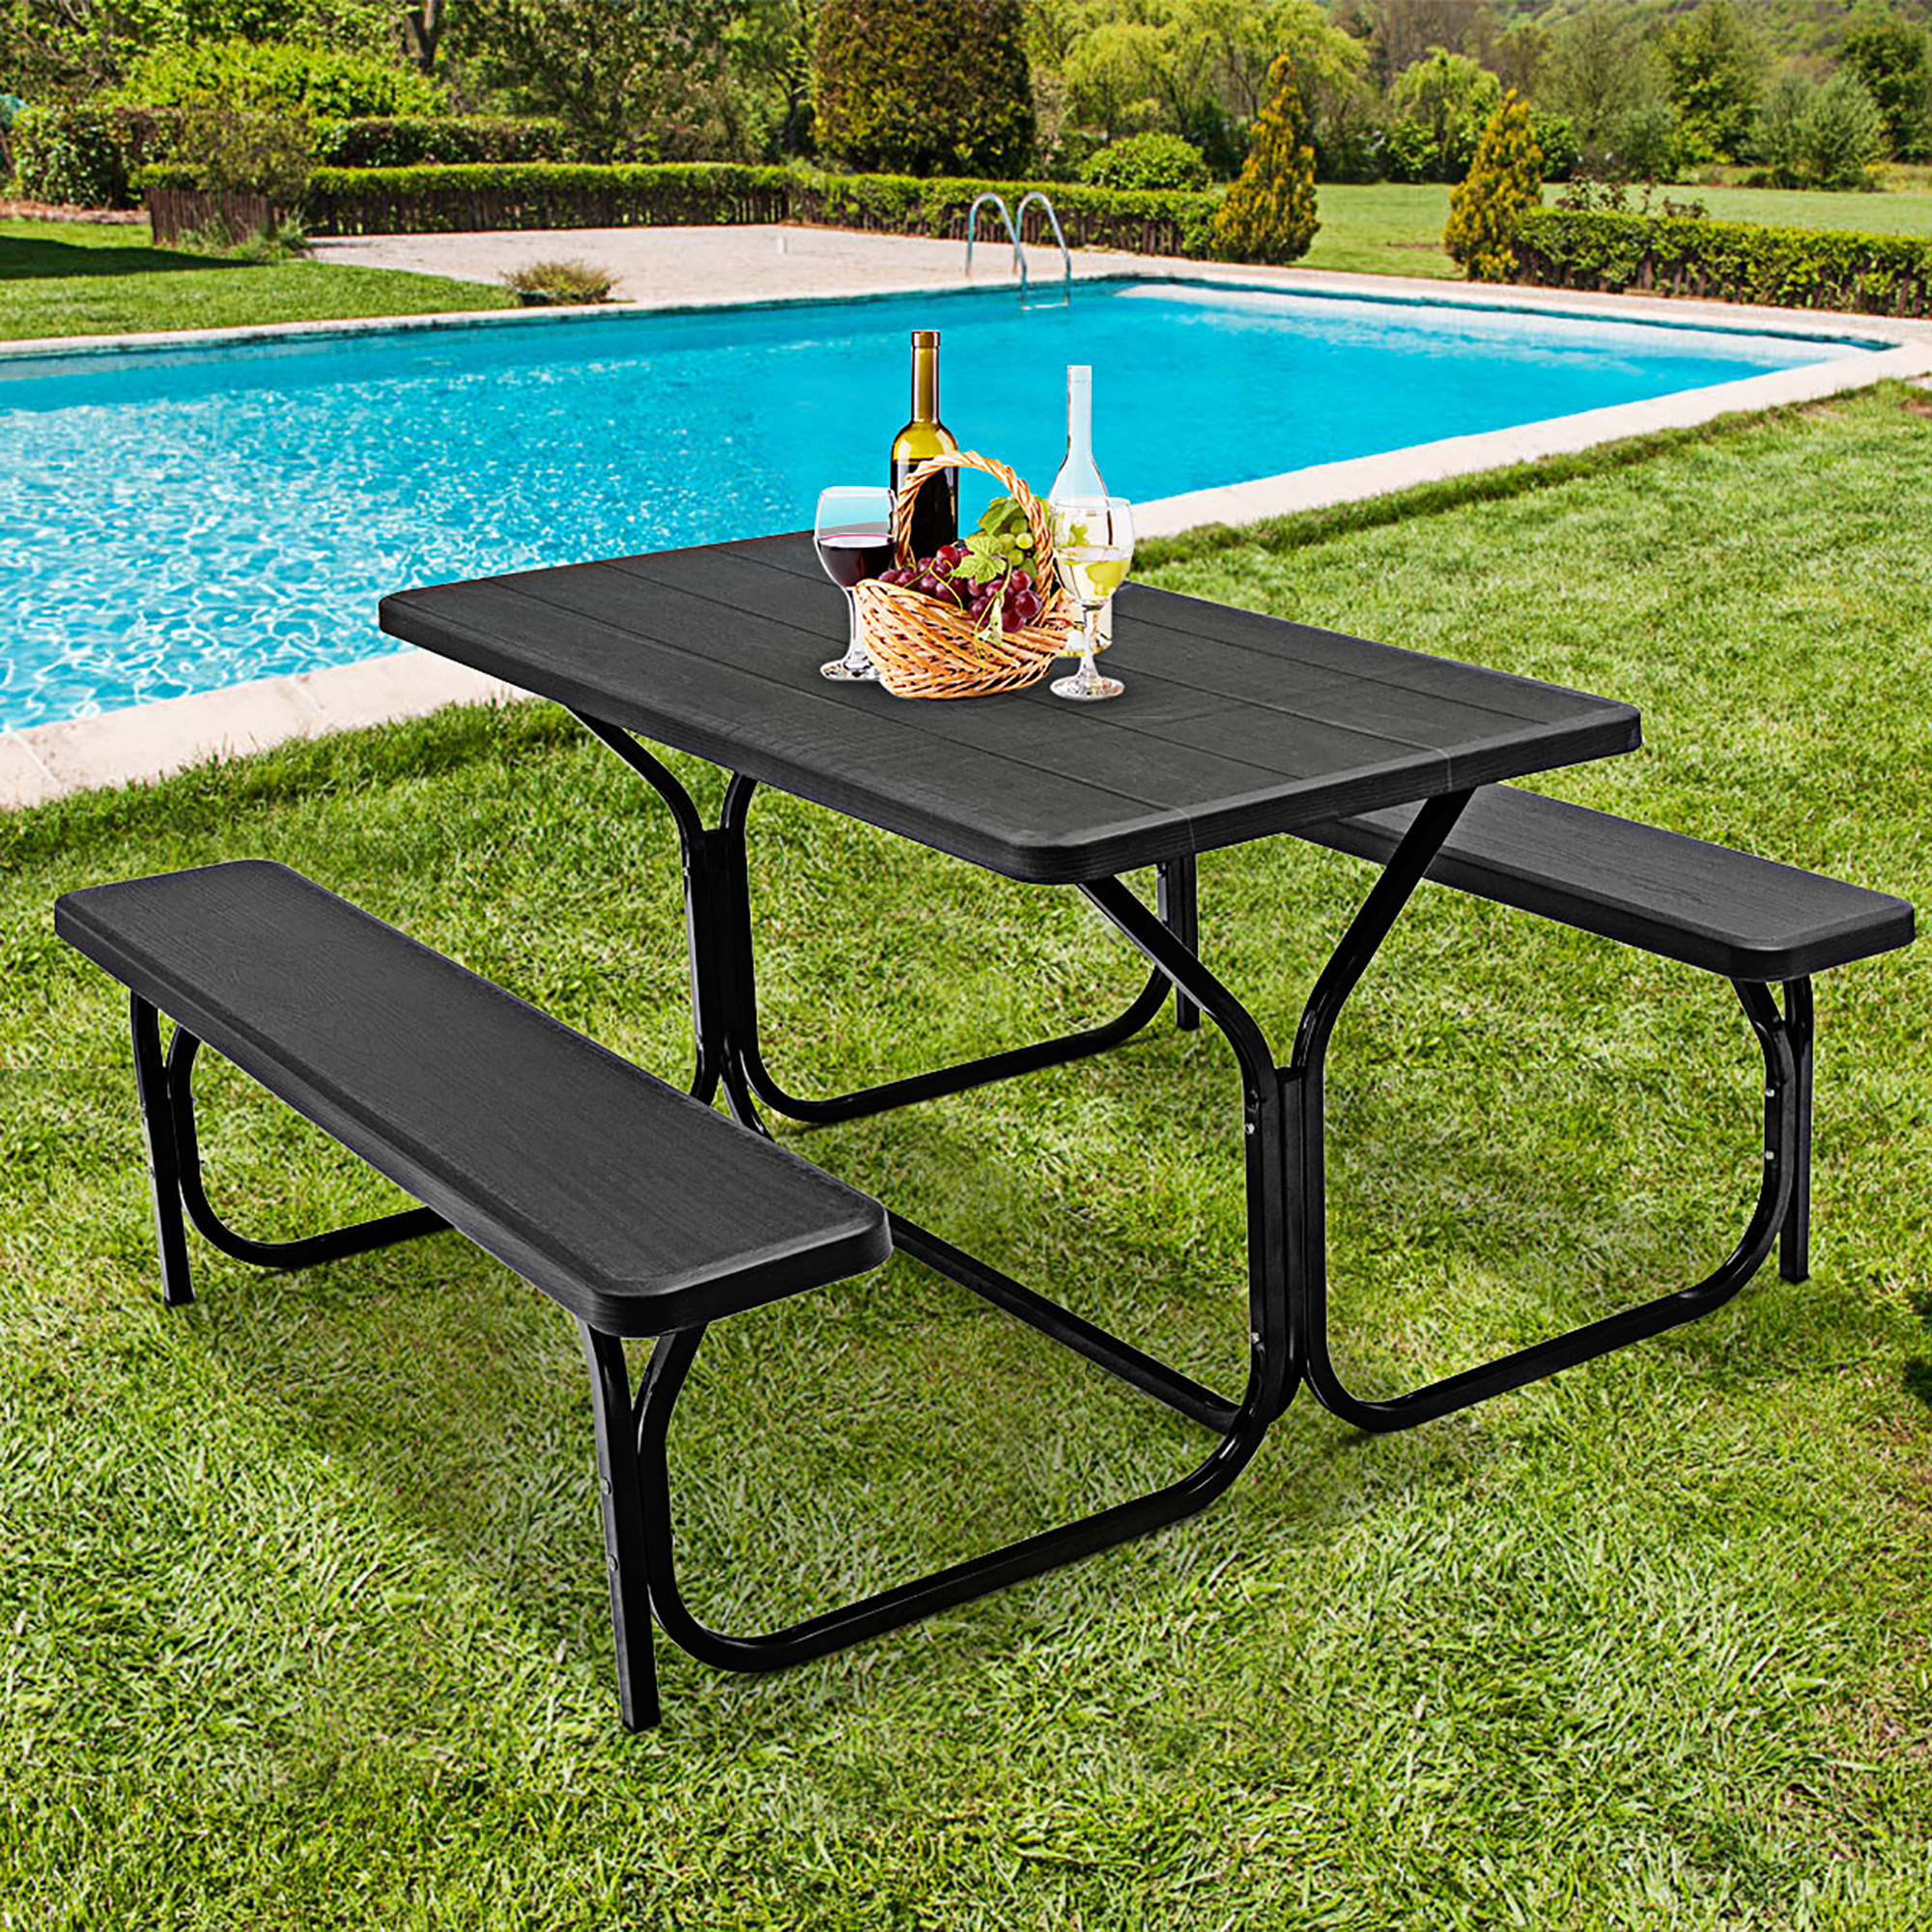 Costway Picnic Table Bench Set Outdoor Backyard Iron Patio Garden Party Dining All Weather Black - image 1 of 8